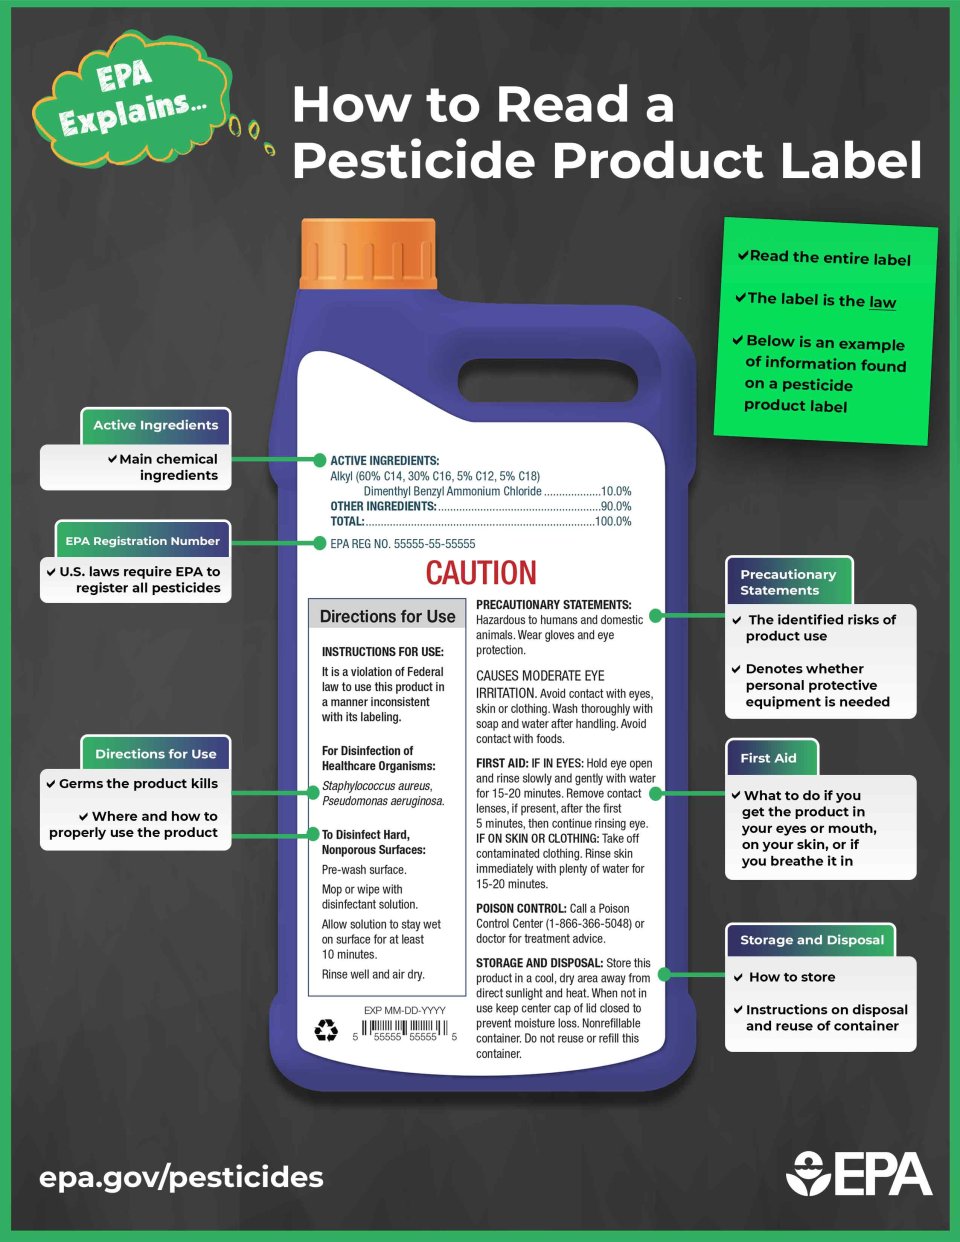 Illustrated graphic of pesticide product bottle. Bottle reads CAUTION and has product information and instructions. Thought bubble that reads: EPA Explains Title: How to Read a Pesticide Product Label Sticky note in the corner: Read the entire label, The label is the law, Below is an example of information found on a pesticide product label Text bubbles pointing to sections of the bottle Active Ingredients: Main chemical ingredients EPA registration number: U.S. laws require EPA to register all pesticides.